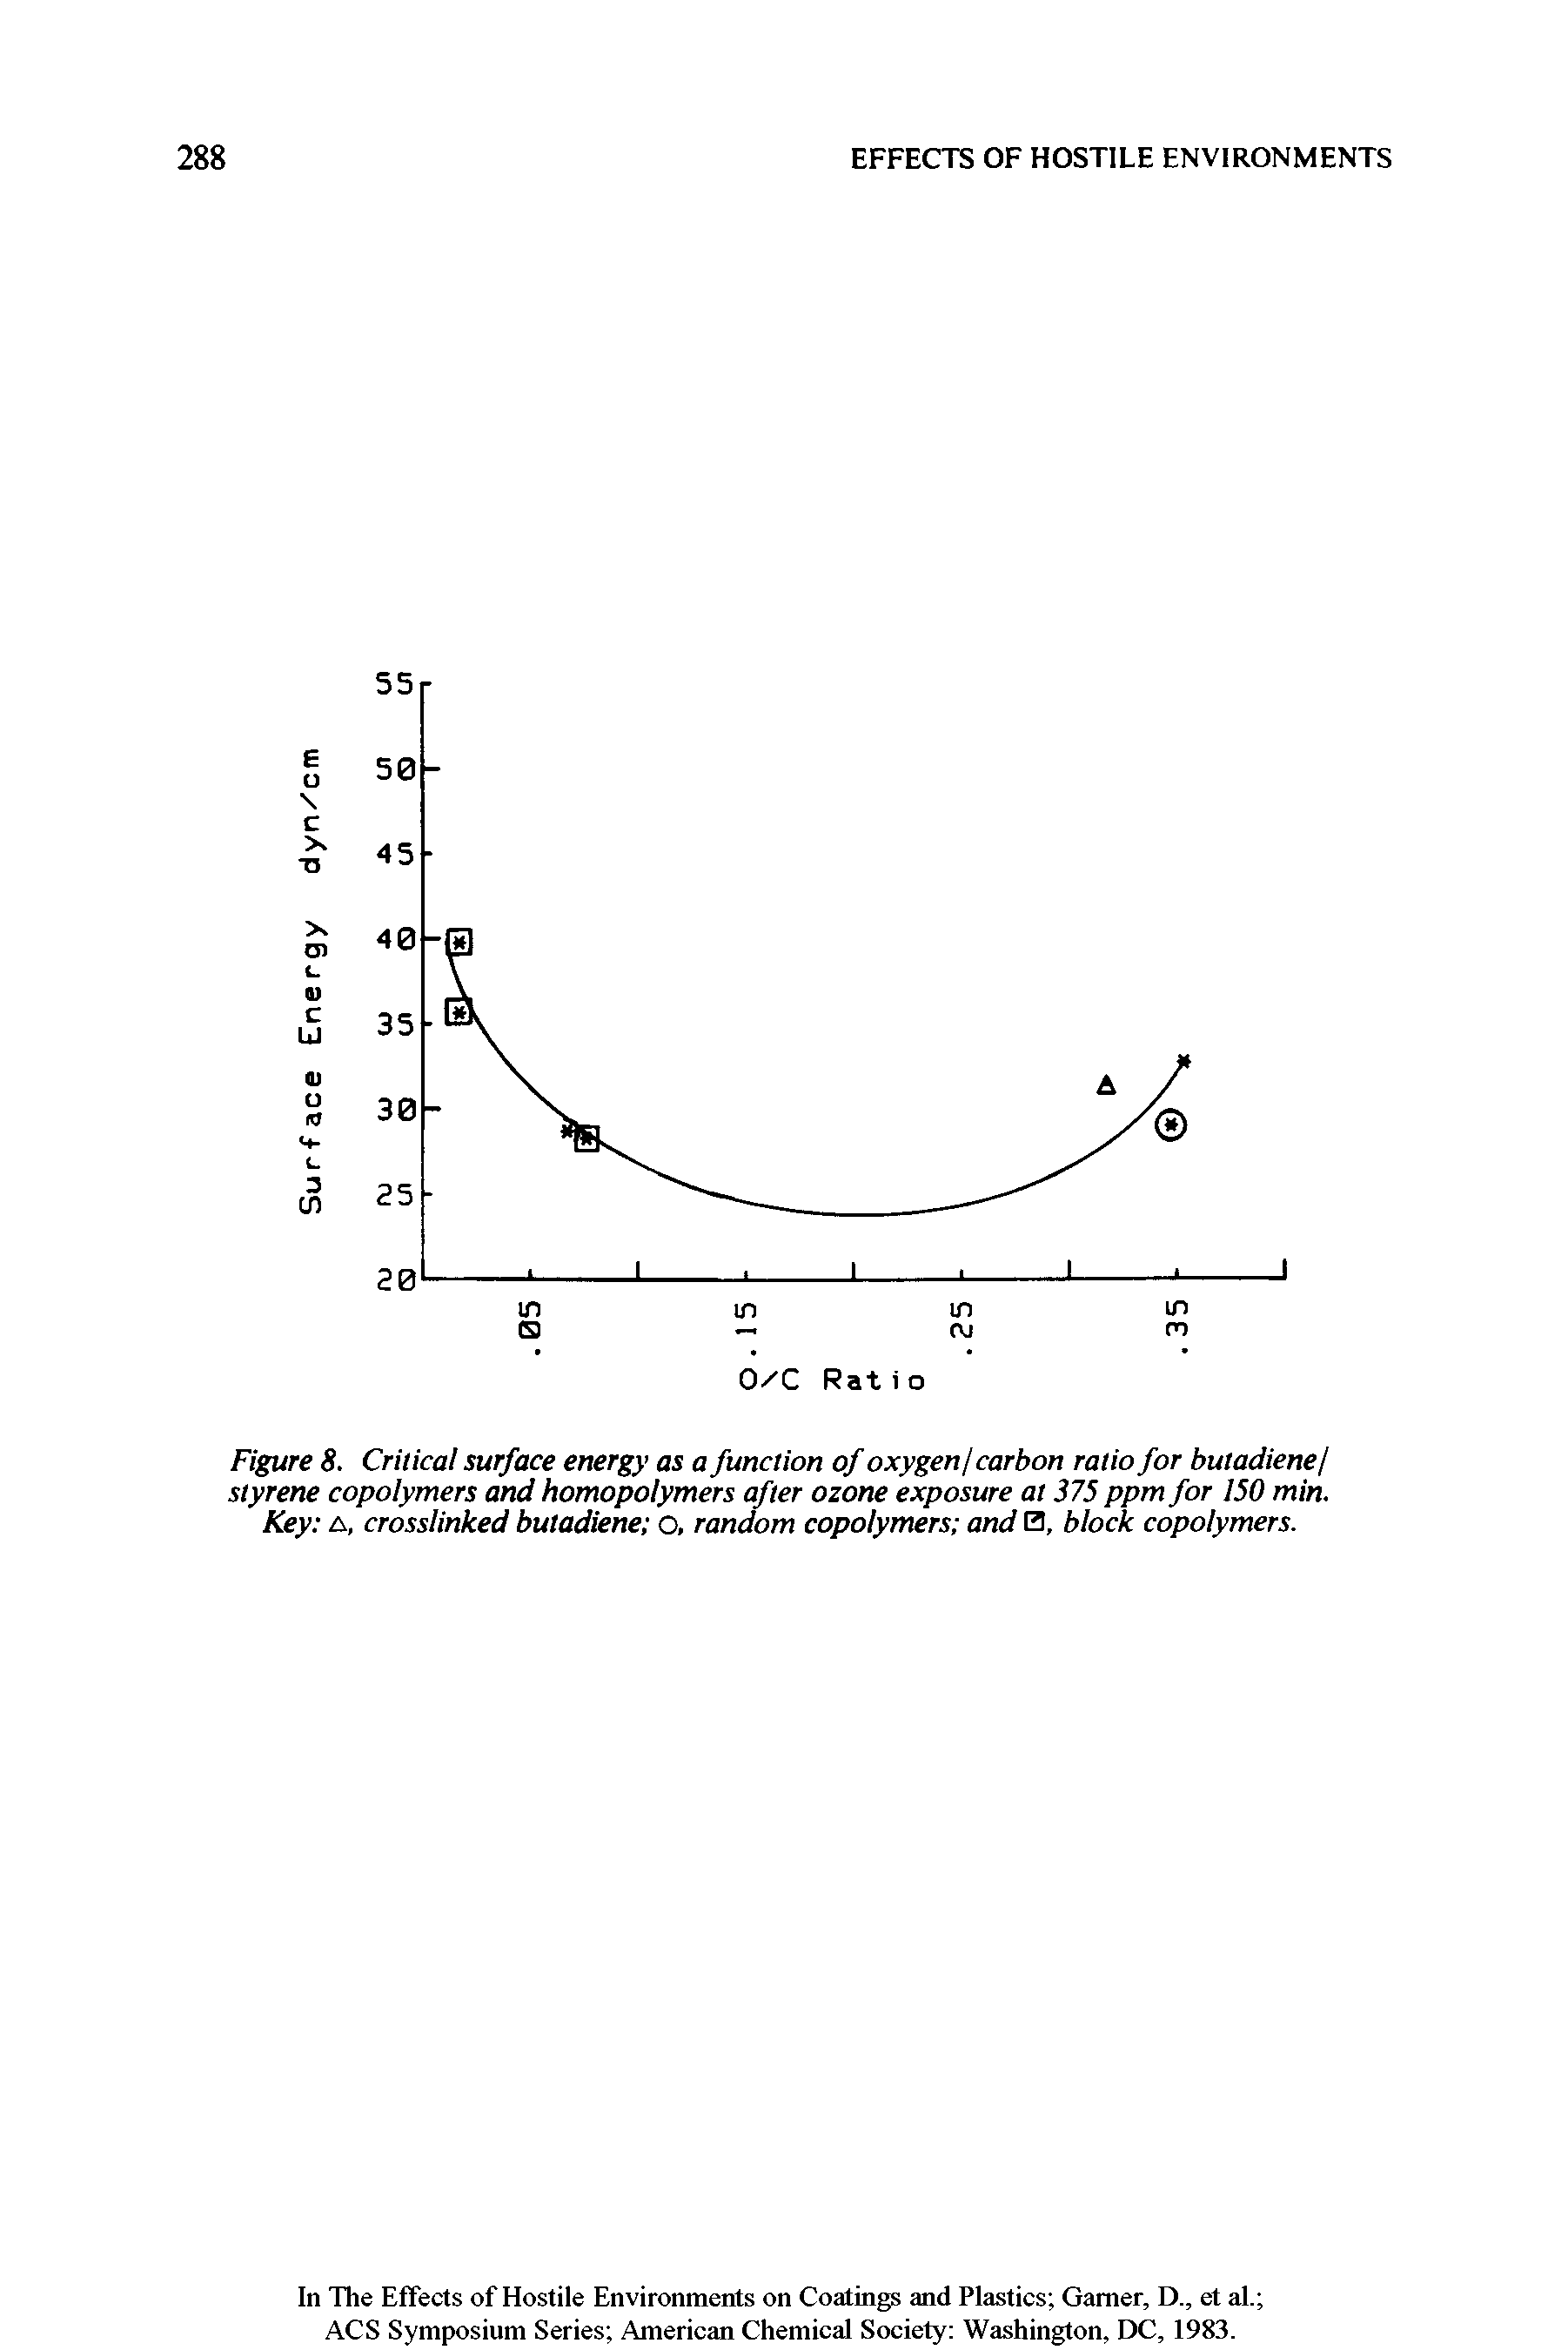 Figure 8. Critical surface energy as a function of oxygen carbon ratio for butadiene styrene copolymers and homopolymers after ozone exposure at 375 ppm for 150 min. Key a, crosslinked butadiene o, random copolymers and 0, block copolymers.